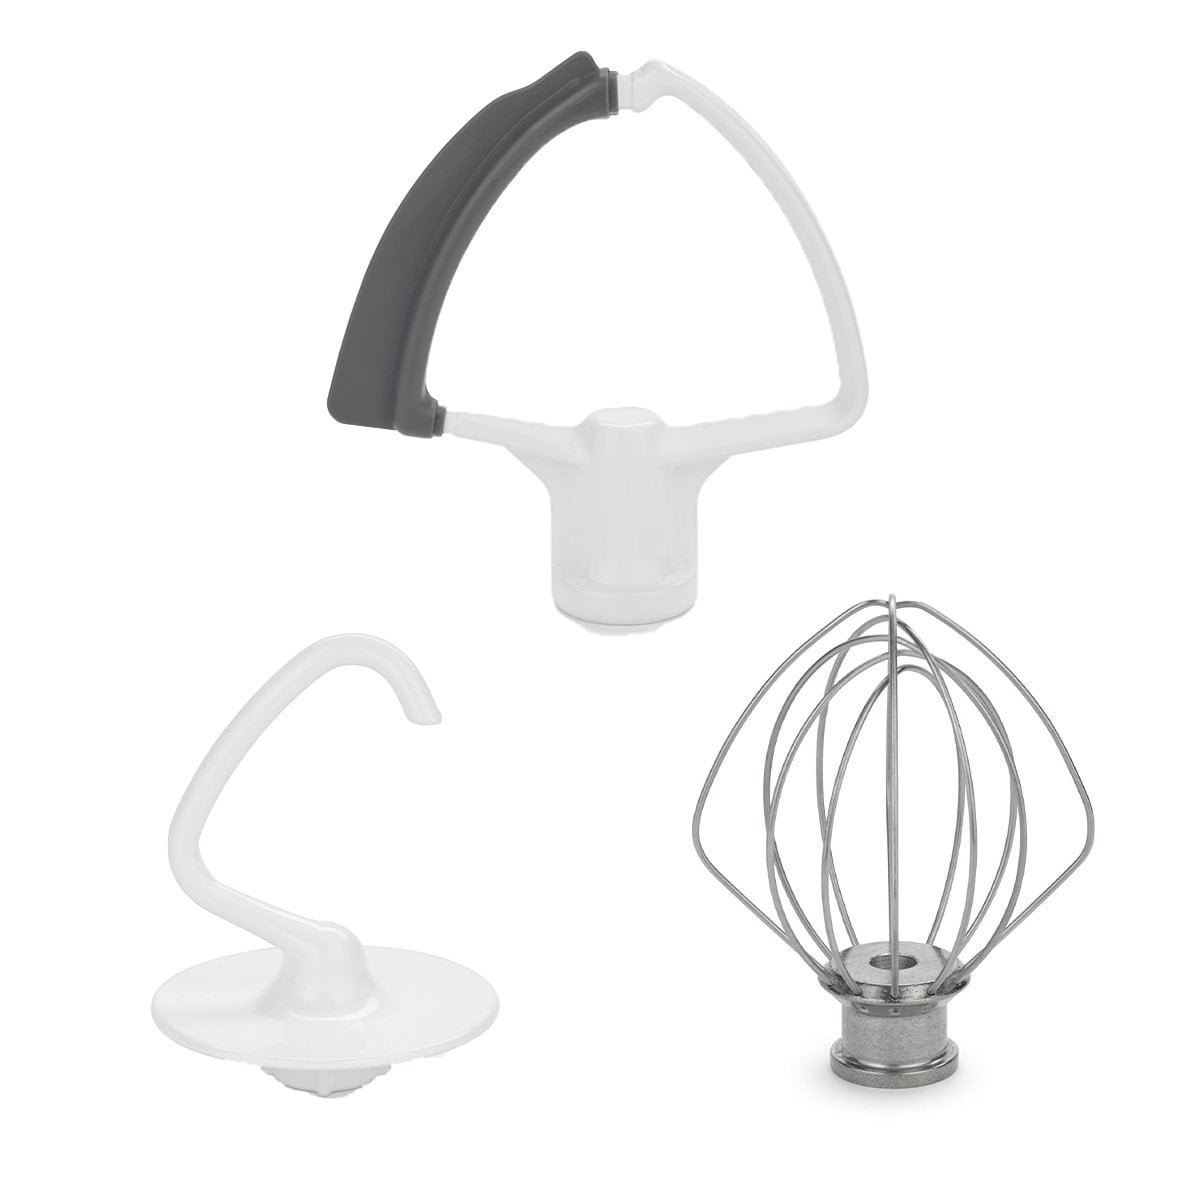 Replacement Assecories for Kitchenaid Mixer for KitchenAid 5-6QT Tilt-Head Stand  Mixers Kitchenaid Paddle Attachment